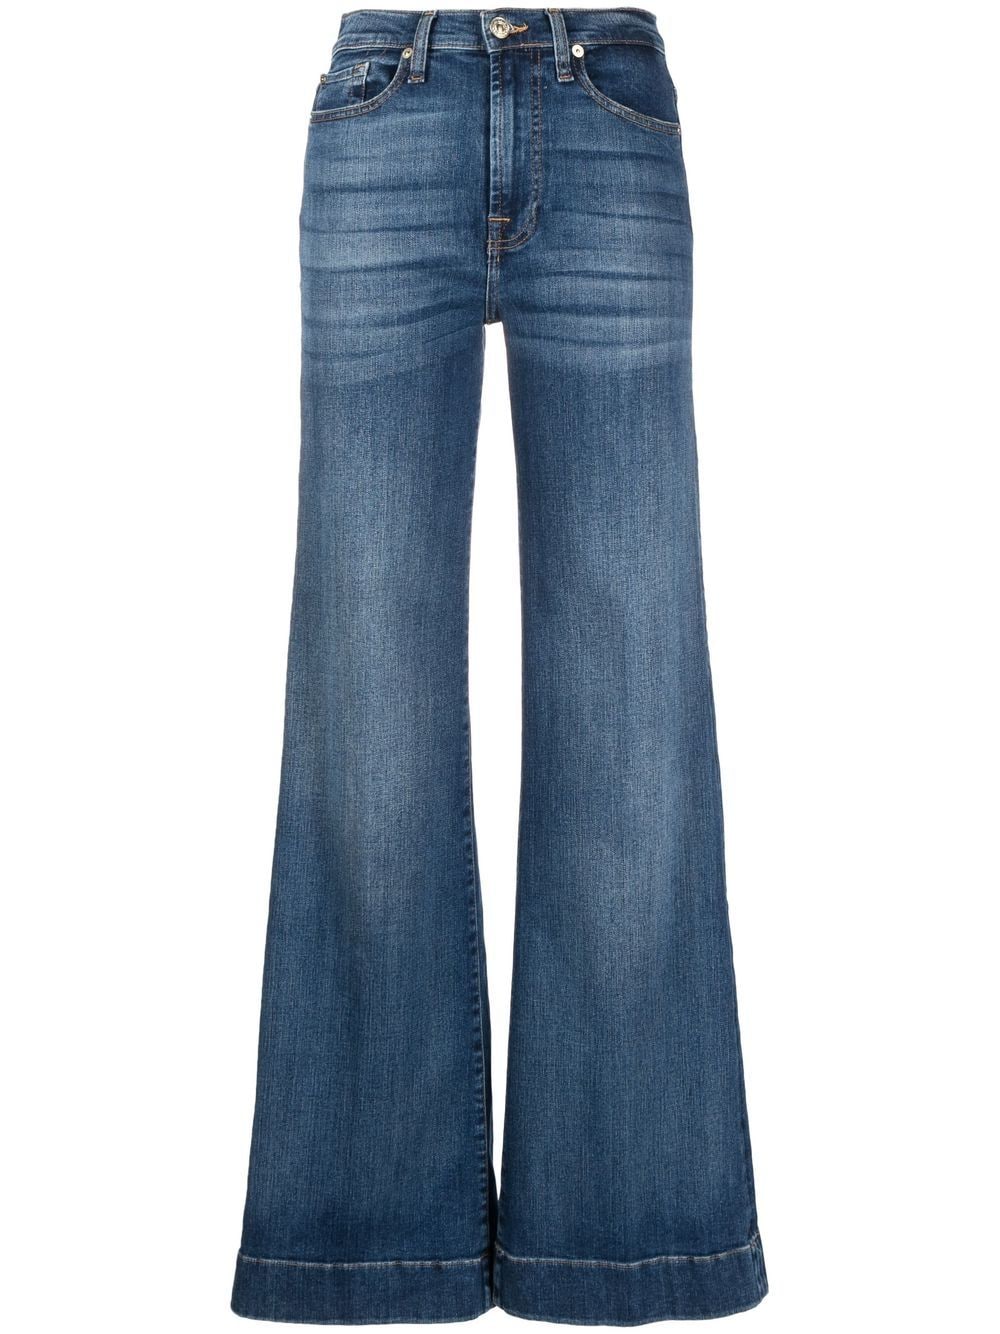 7 For All Mankind flared denim jeans - Blue von 7 For All Mankind